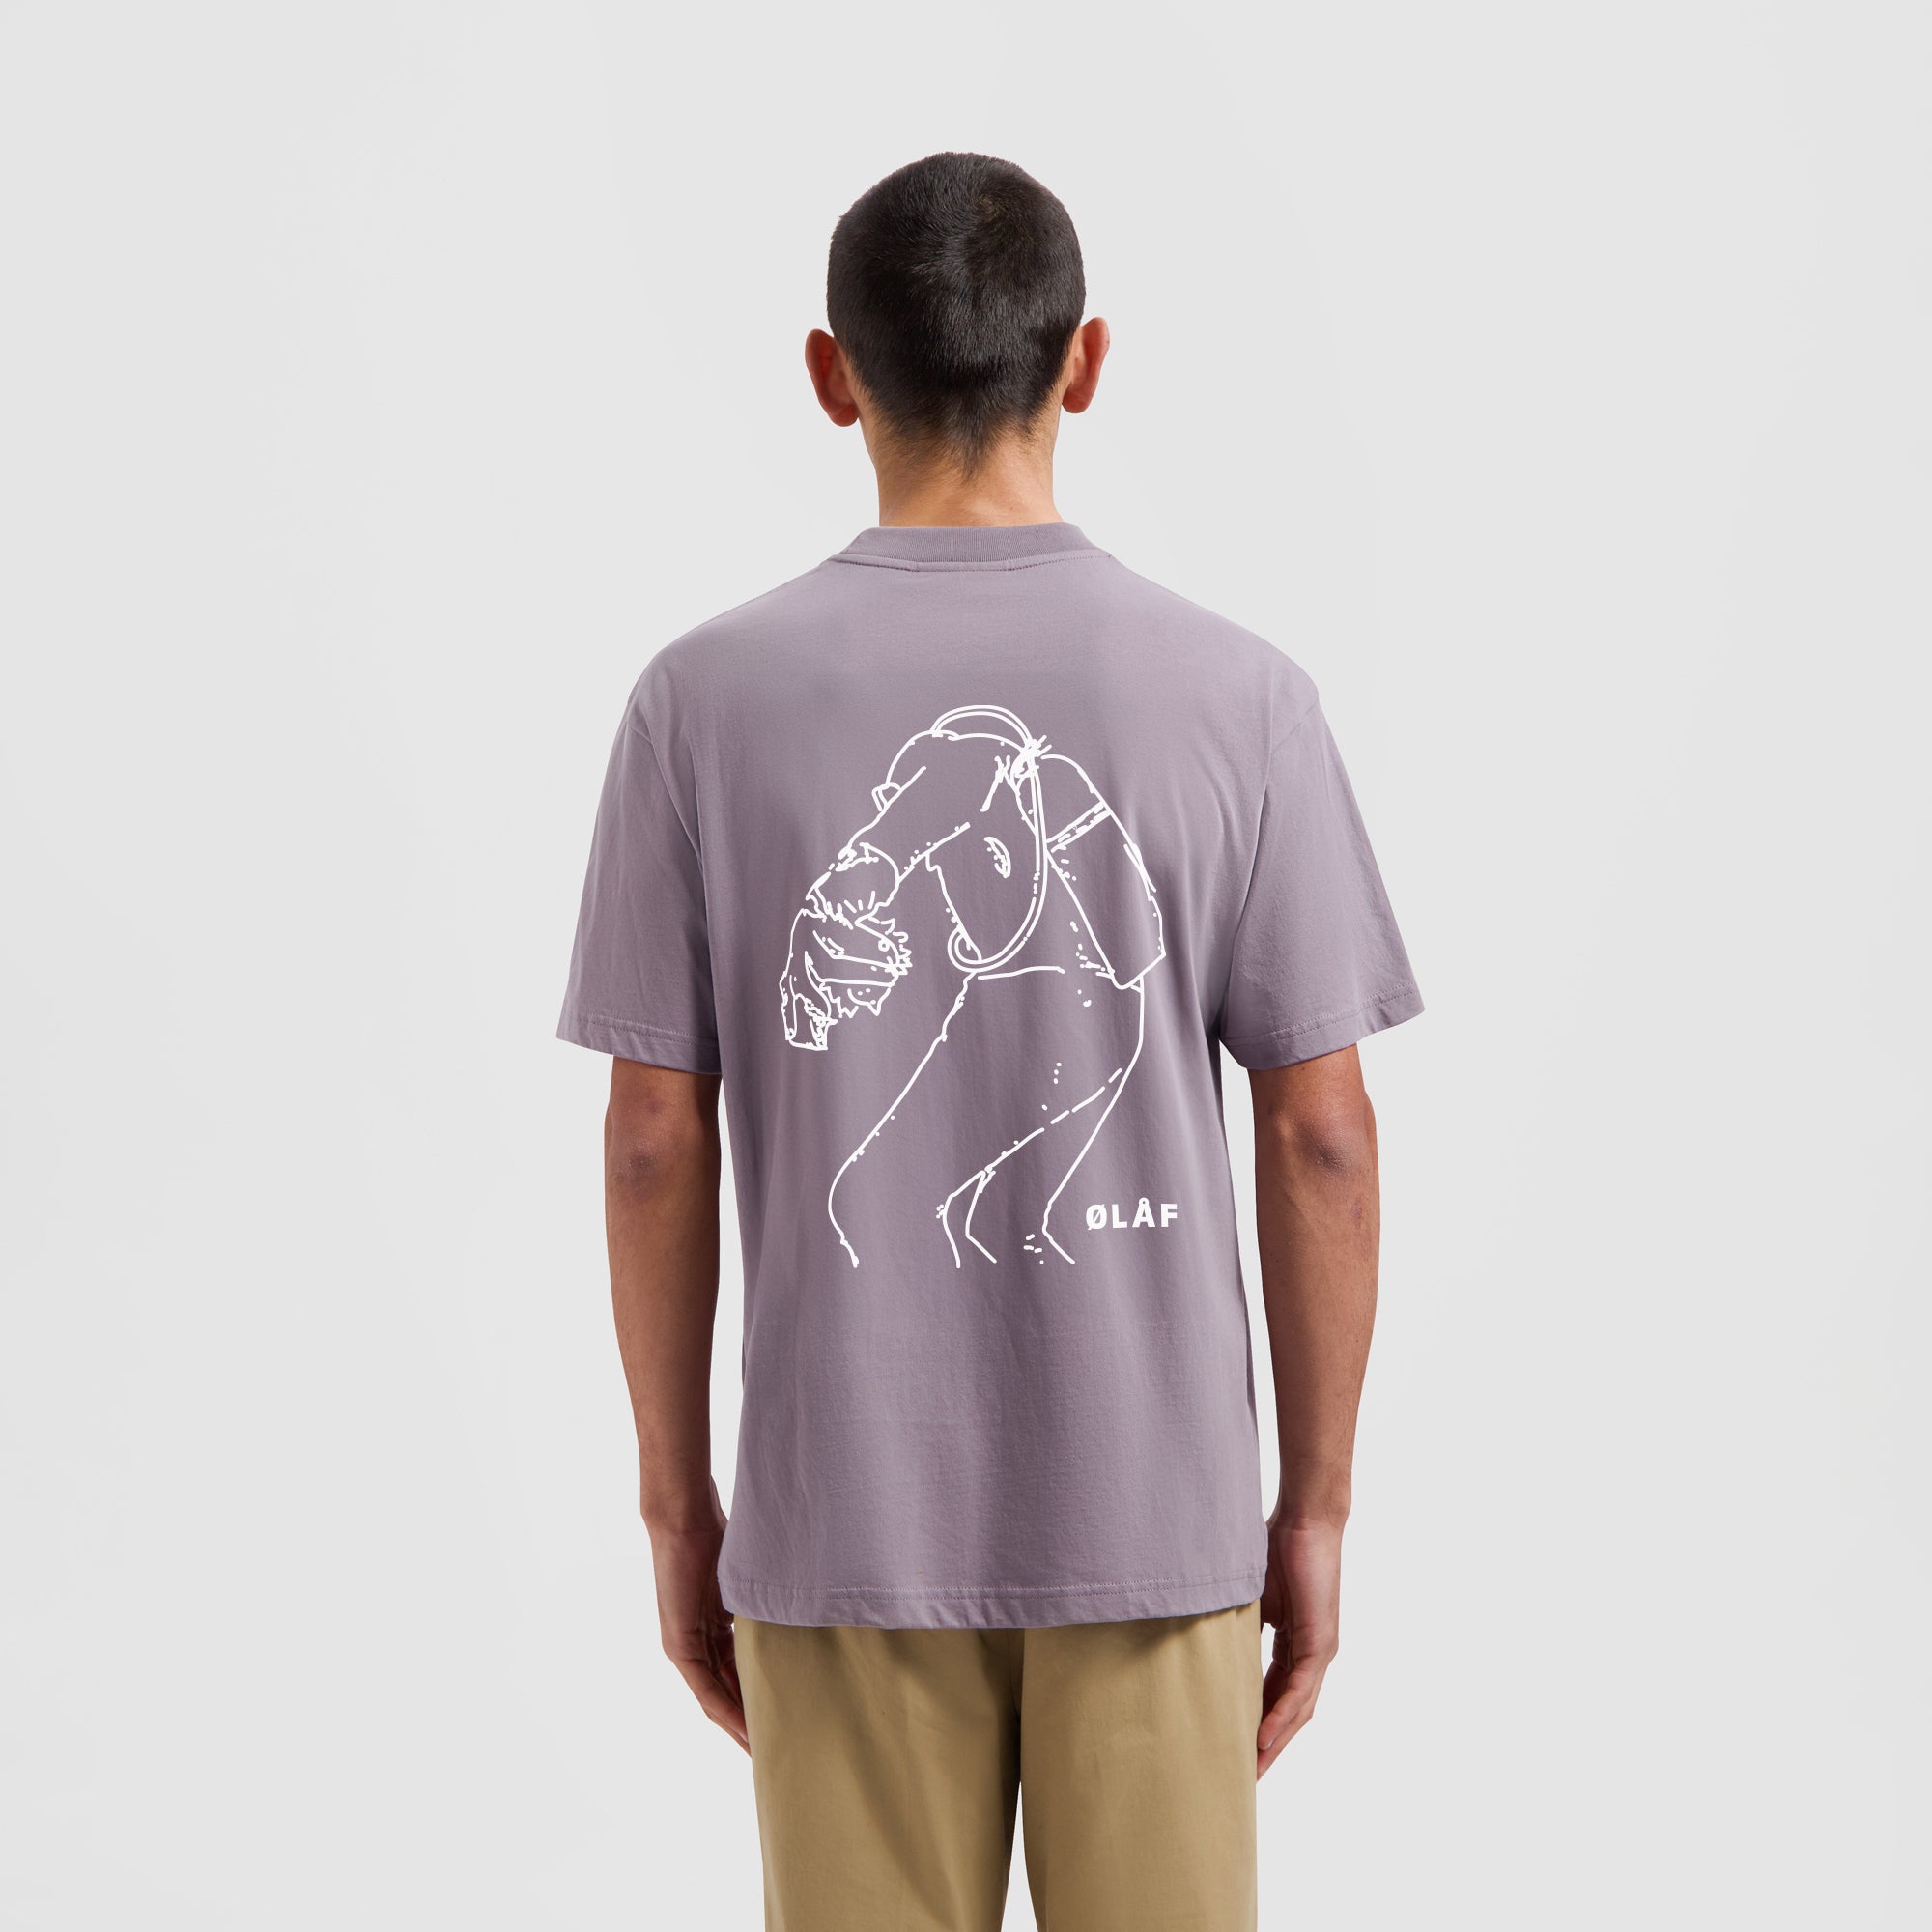 Diver Outline Tee - Stone Grey